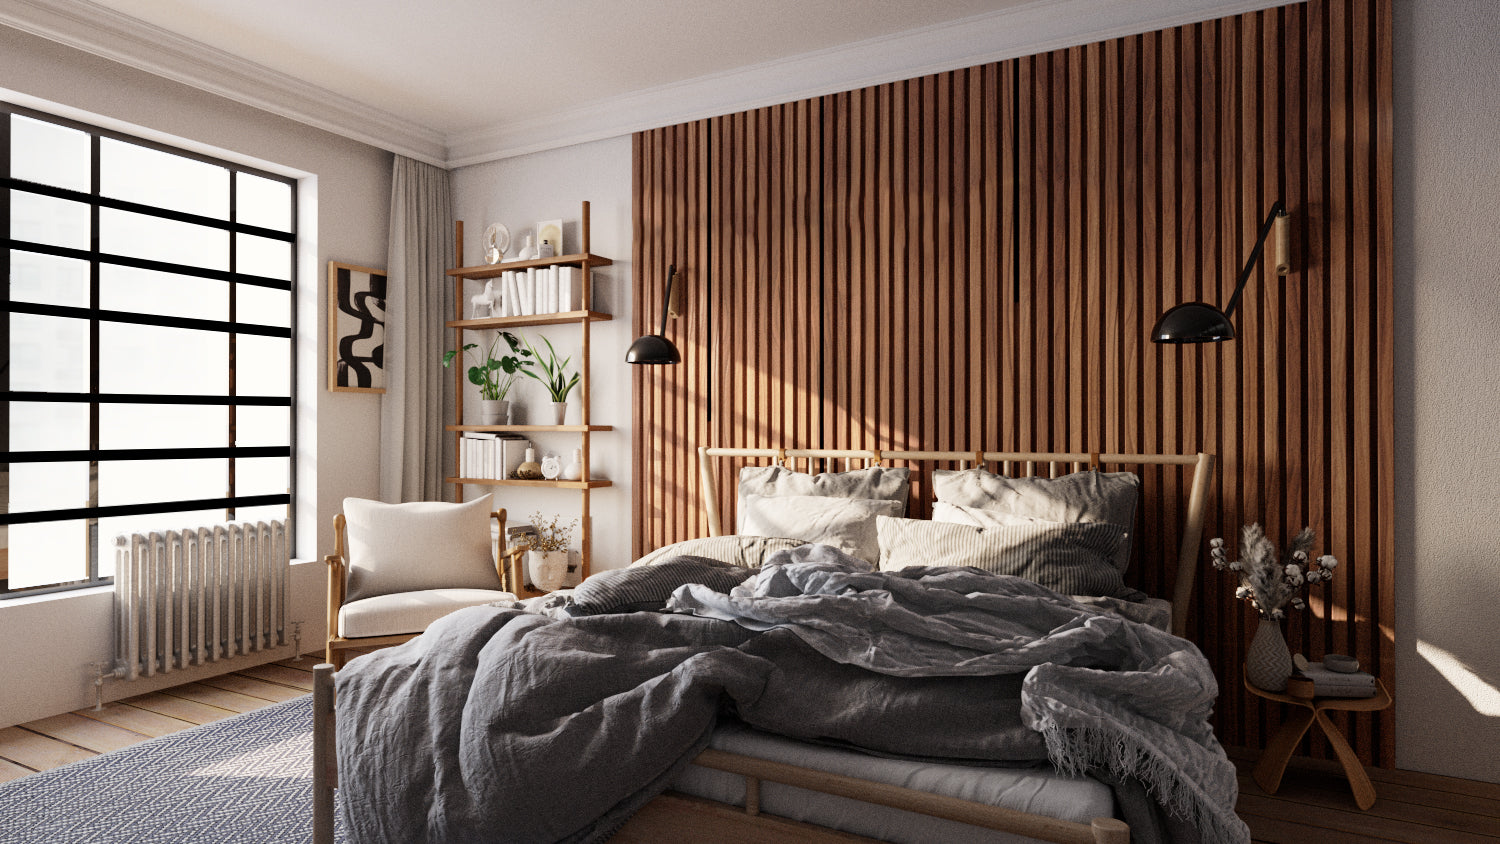 midcentury modern bedroom with vertical wood slat accent wall behind bed